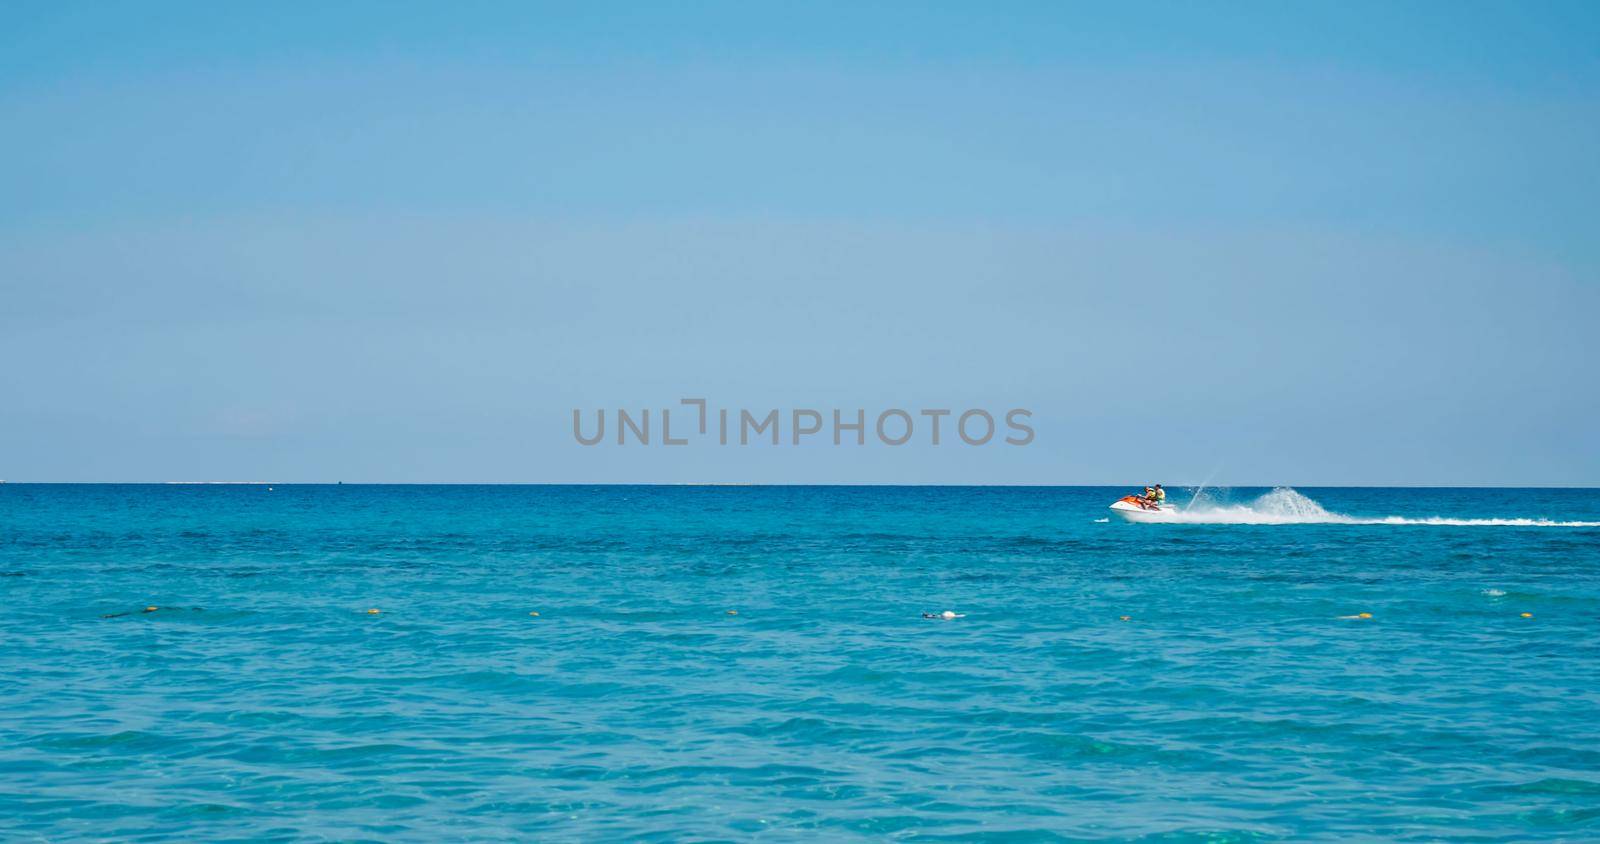 Water scooter movement on Mediterranean sea by RecCameraStock